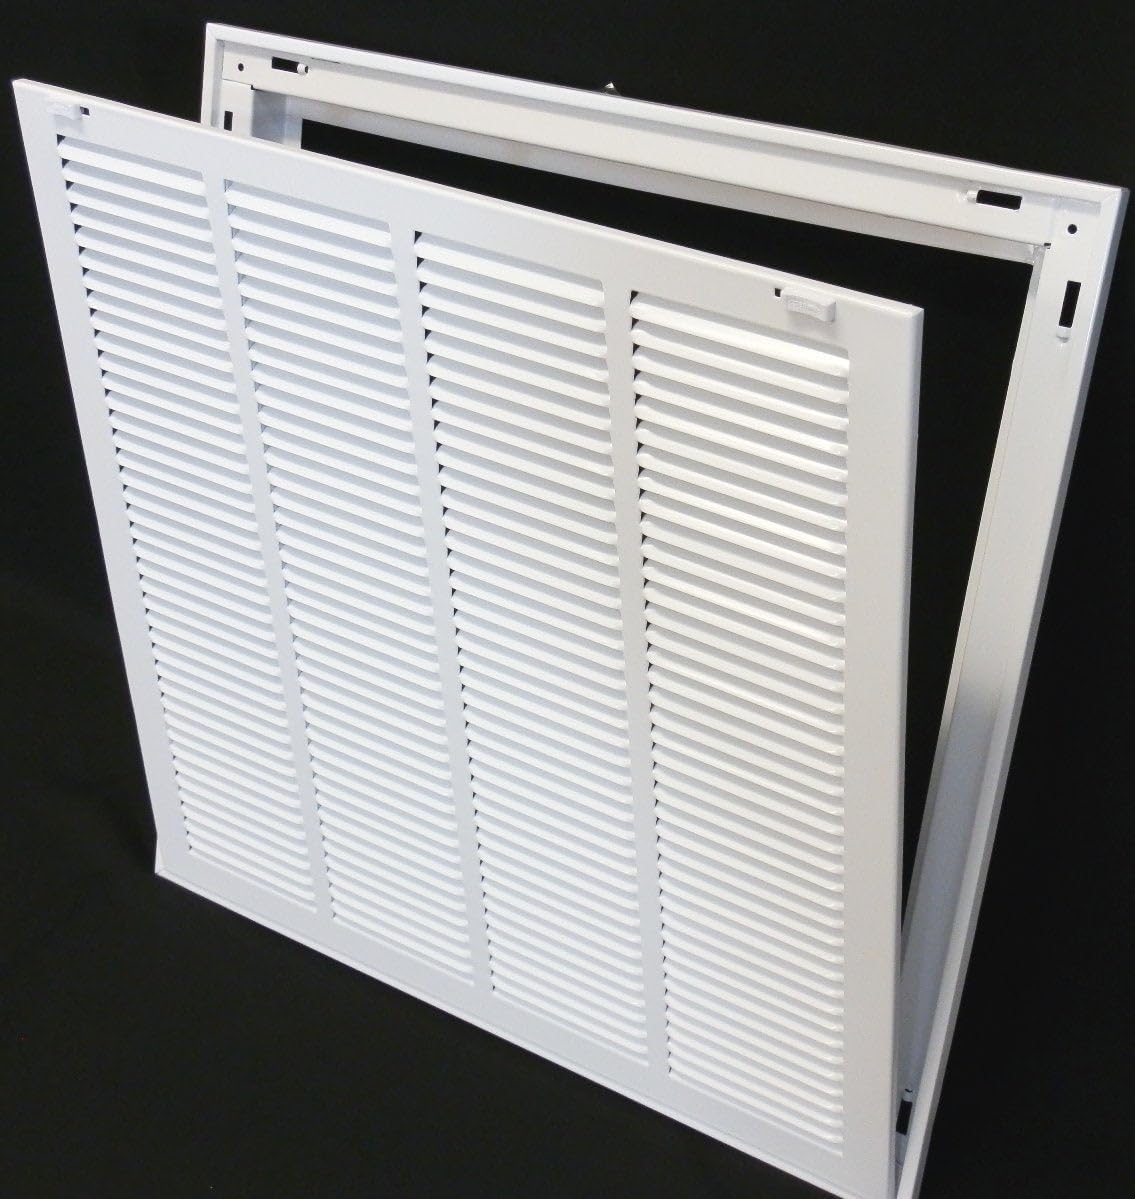 25&quot; X 25&quot; Steel Return Air Filter Grille for 1&quot; Filter - Removable Frame - [Outer Dimensions: 27 5/8&quot; X 27 5/8&quot;]